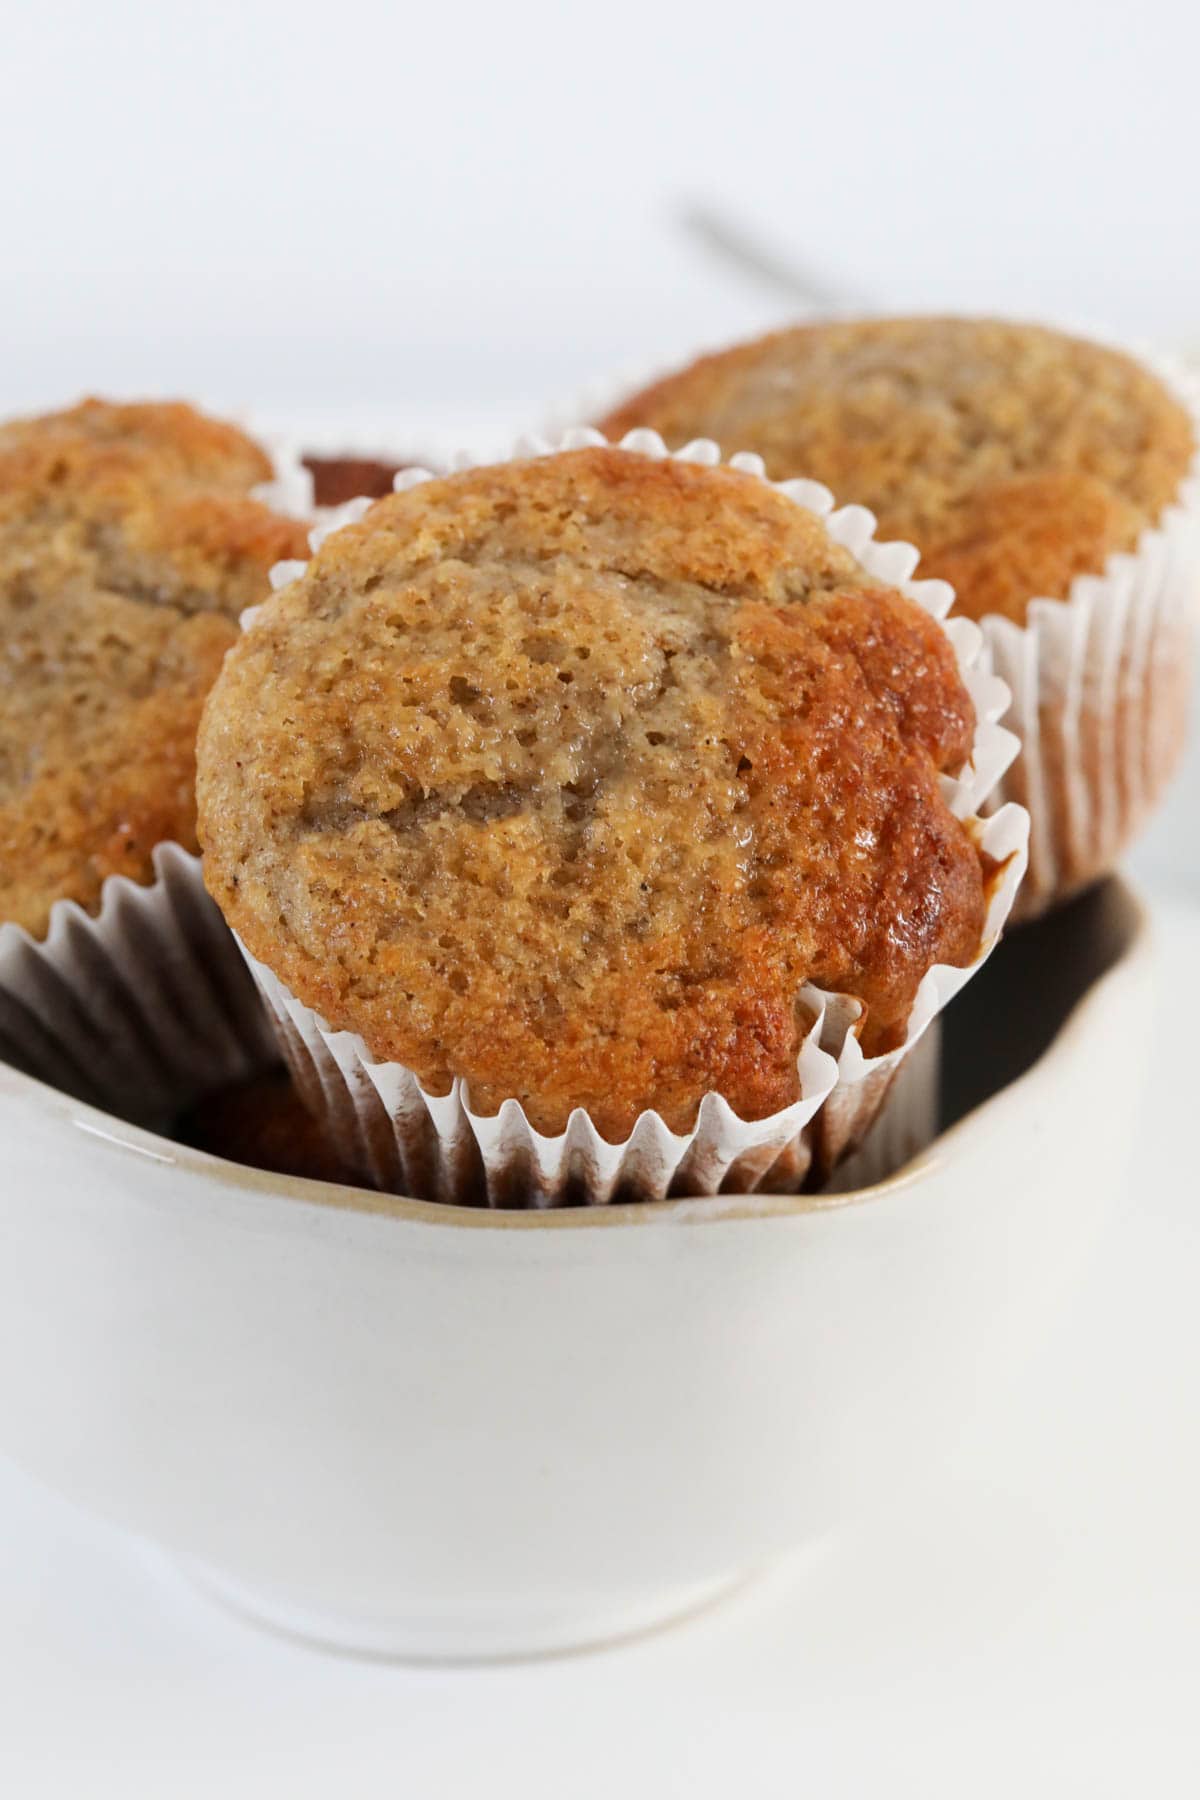 Sugar crusted banana muffins in white paper cases.